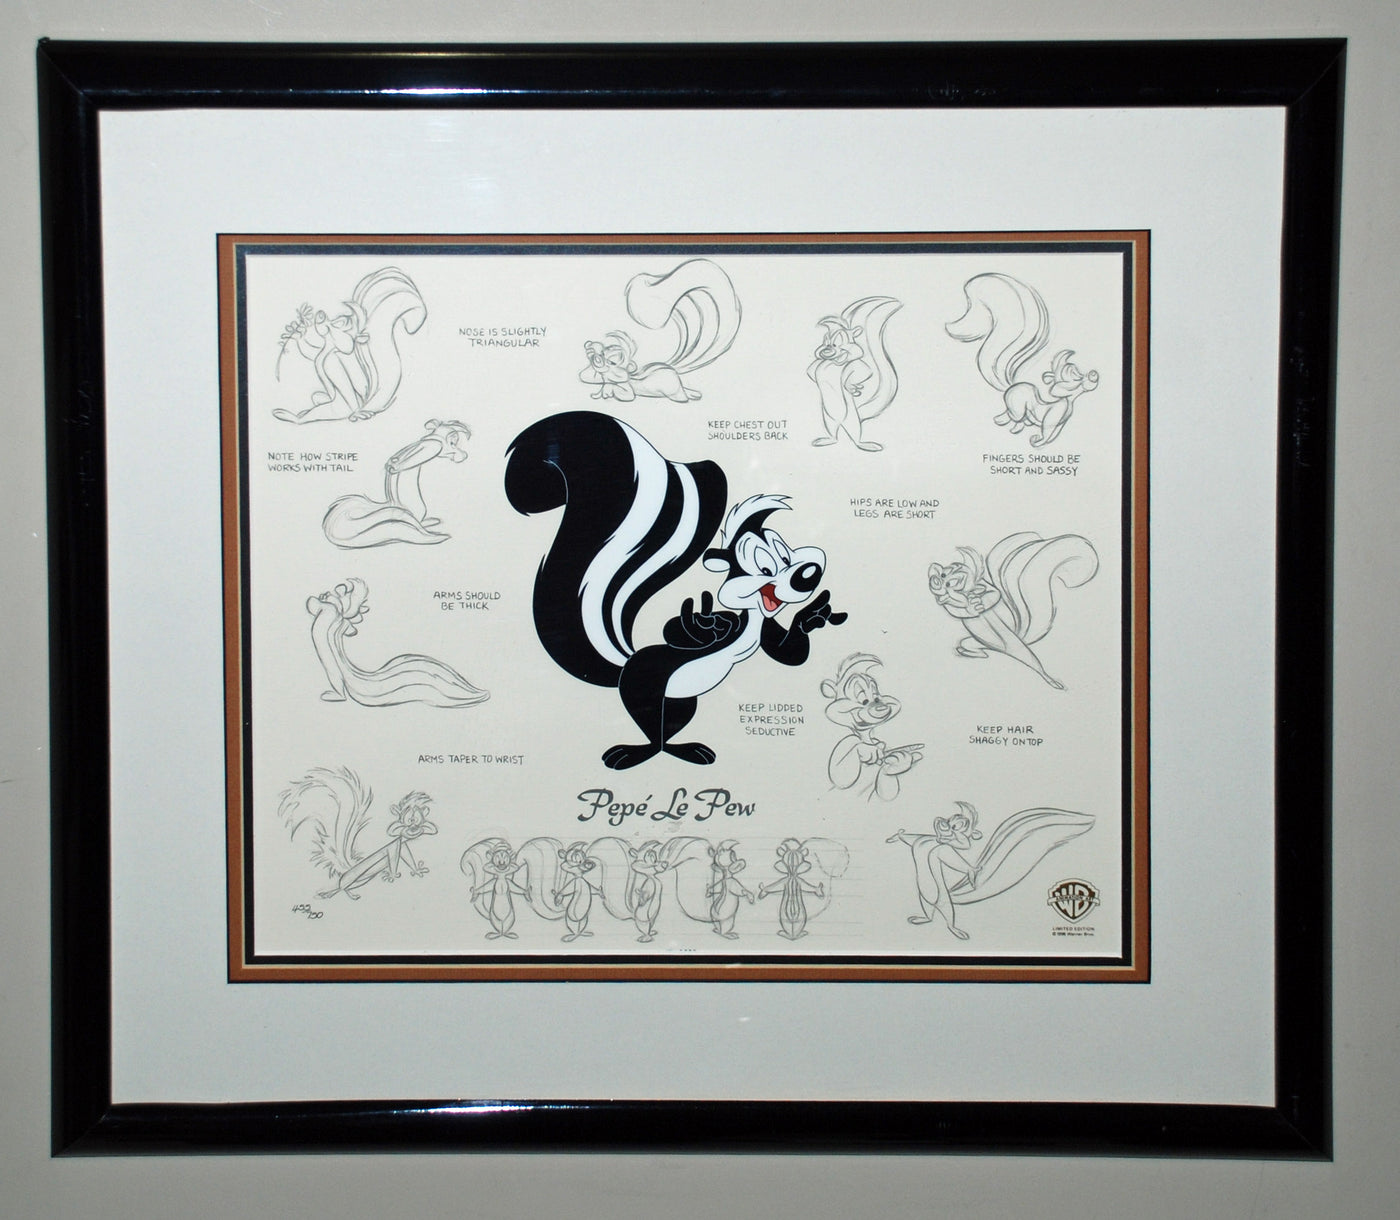 Original Warner Brothers Limited Edition Model Cel Featuring Pepe LePew